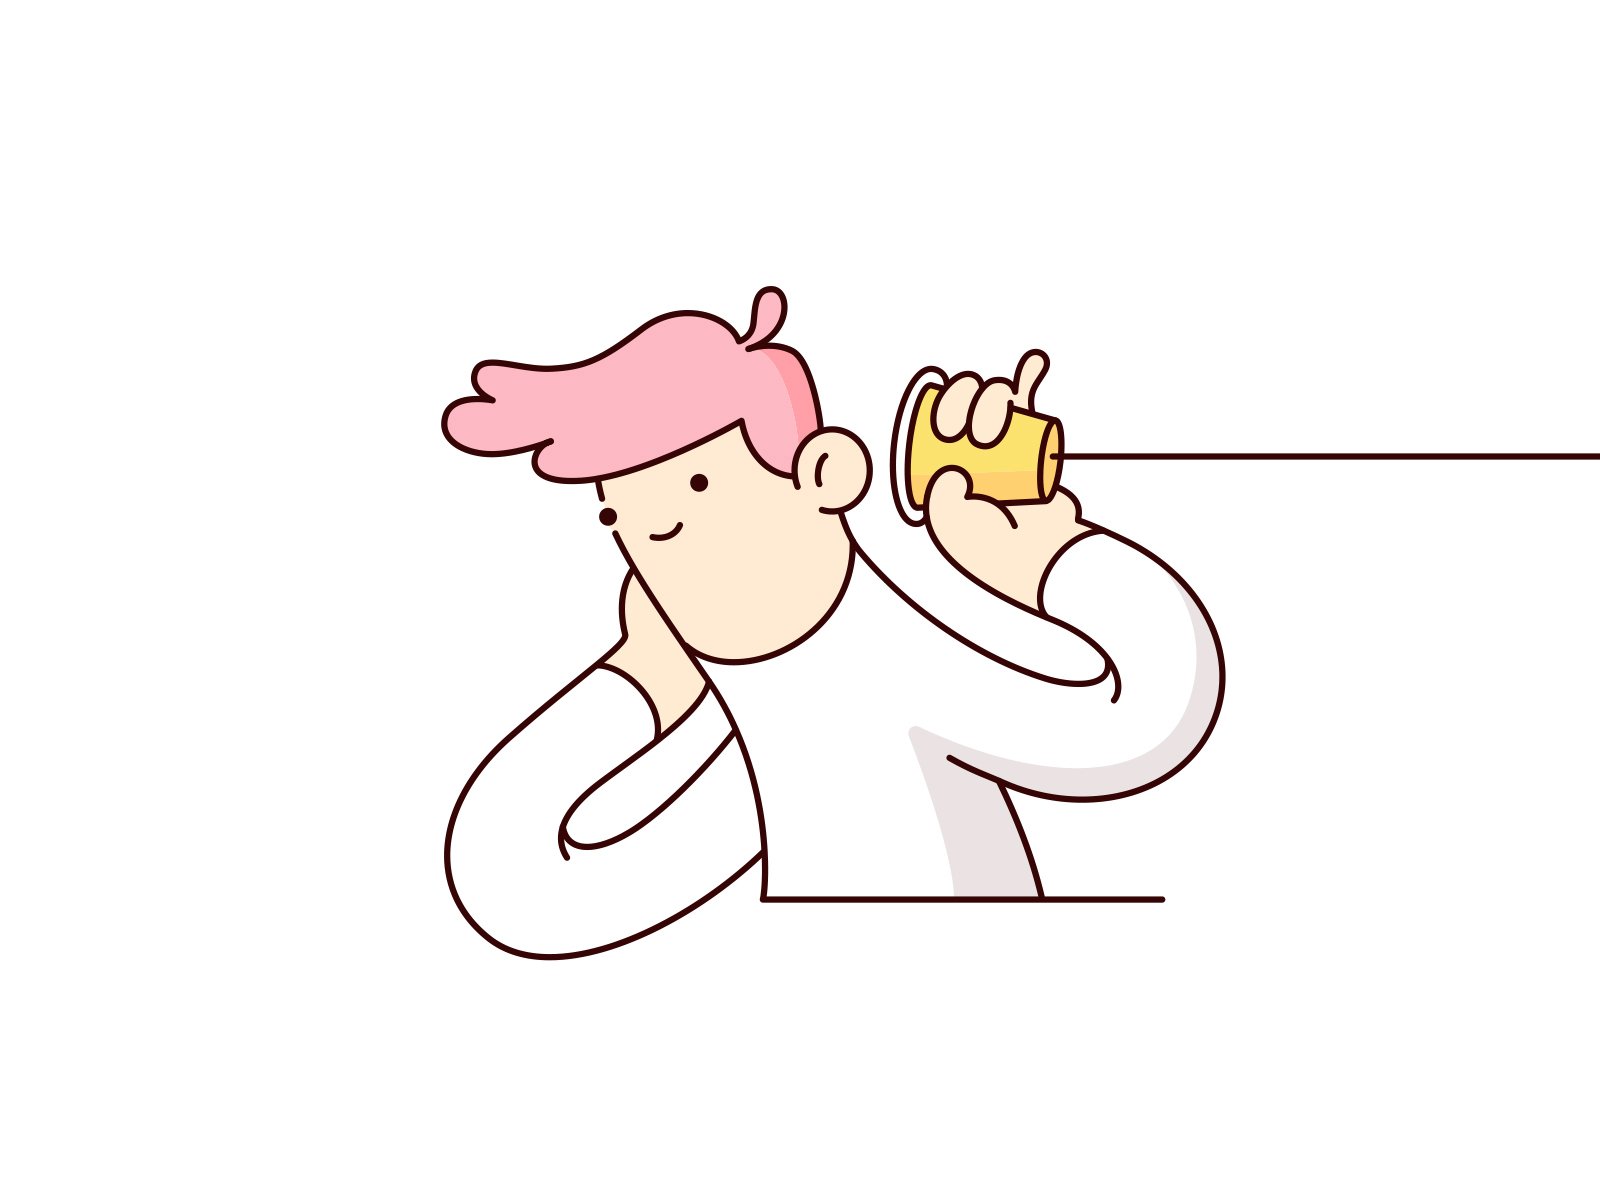 Animated image with a person holding cup phone in hand to the ear, which represents clear communication